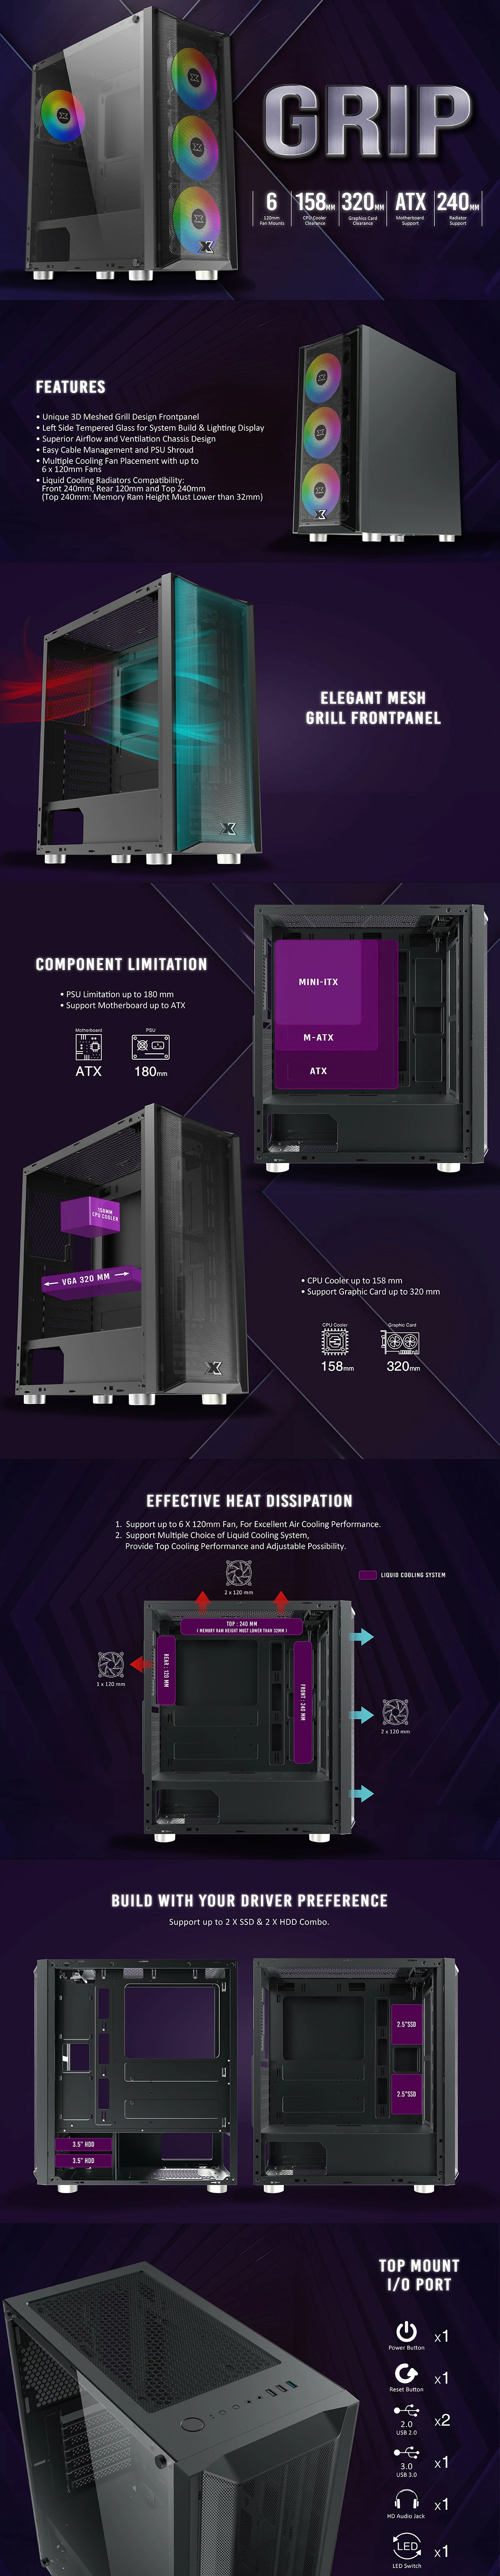 Overview - Xigmatek - Grip - Tempered Glass ARGB Mid Tower Chassis